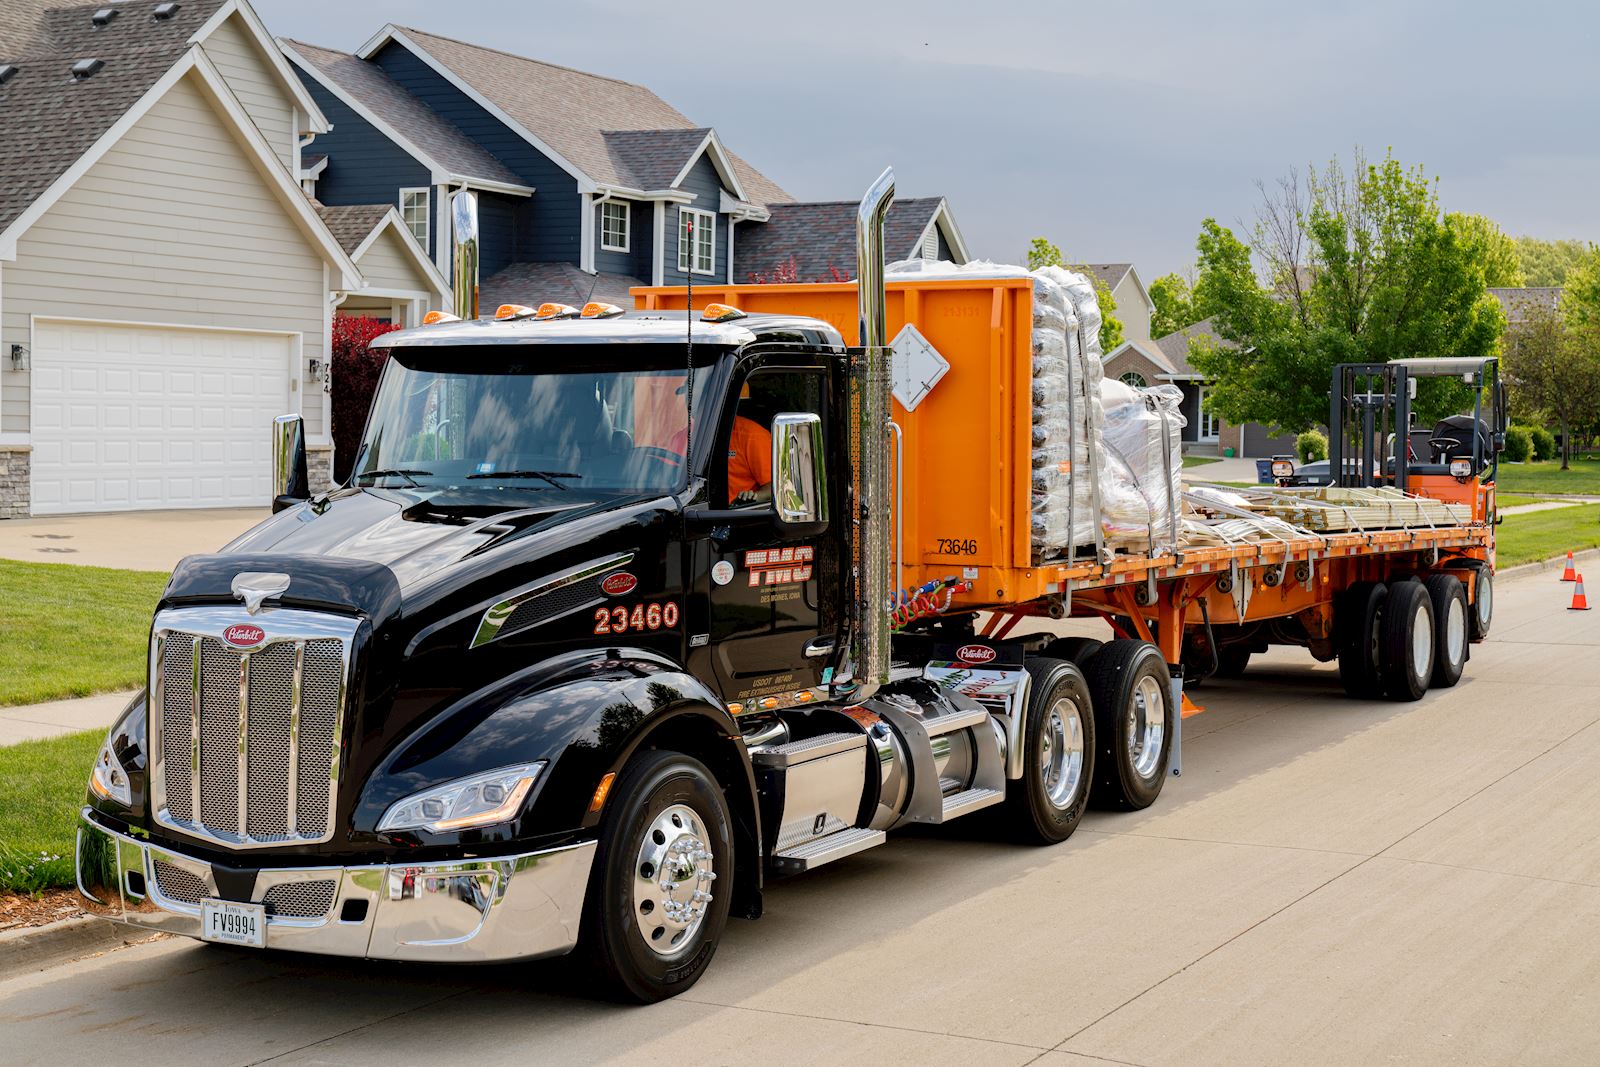 TMC Peterbilt truck completing a final mile delivery